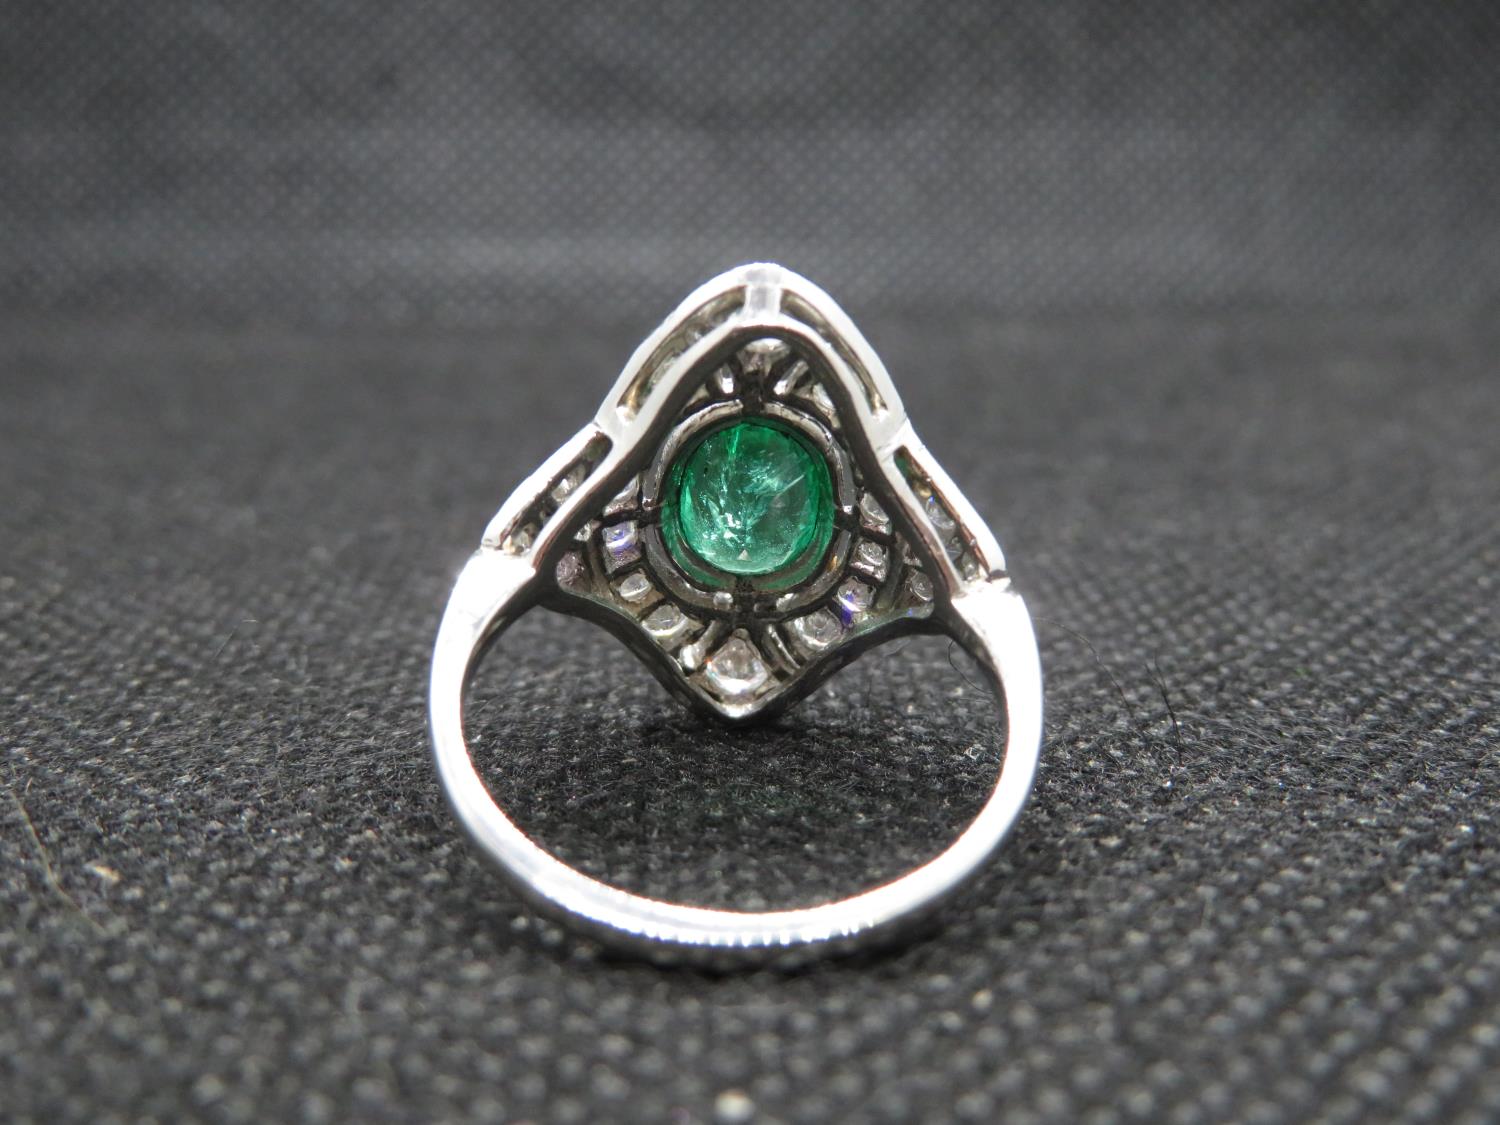 Art Deco platinum emerald and diamond ring diamonds approx 1ct emerald 1.2ct approx weight size P - Image 4 of 5